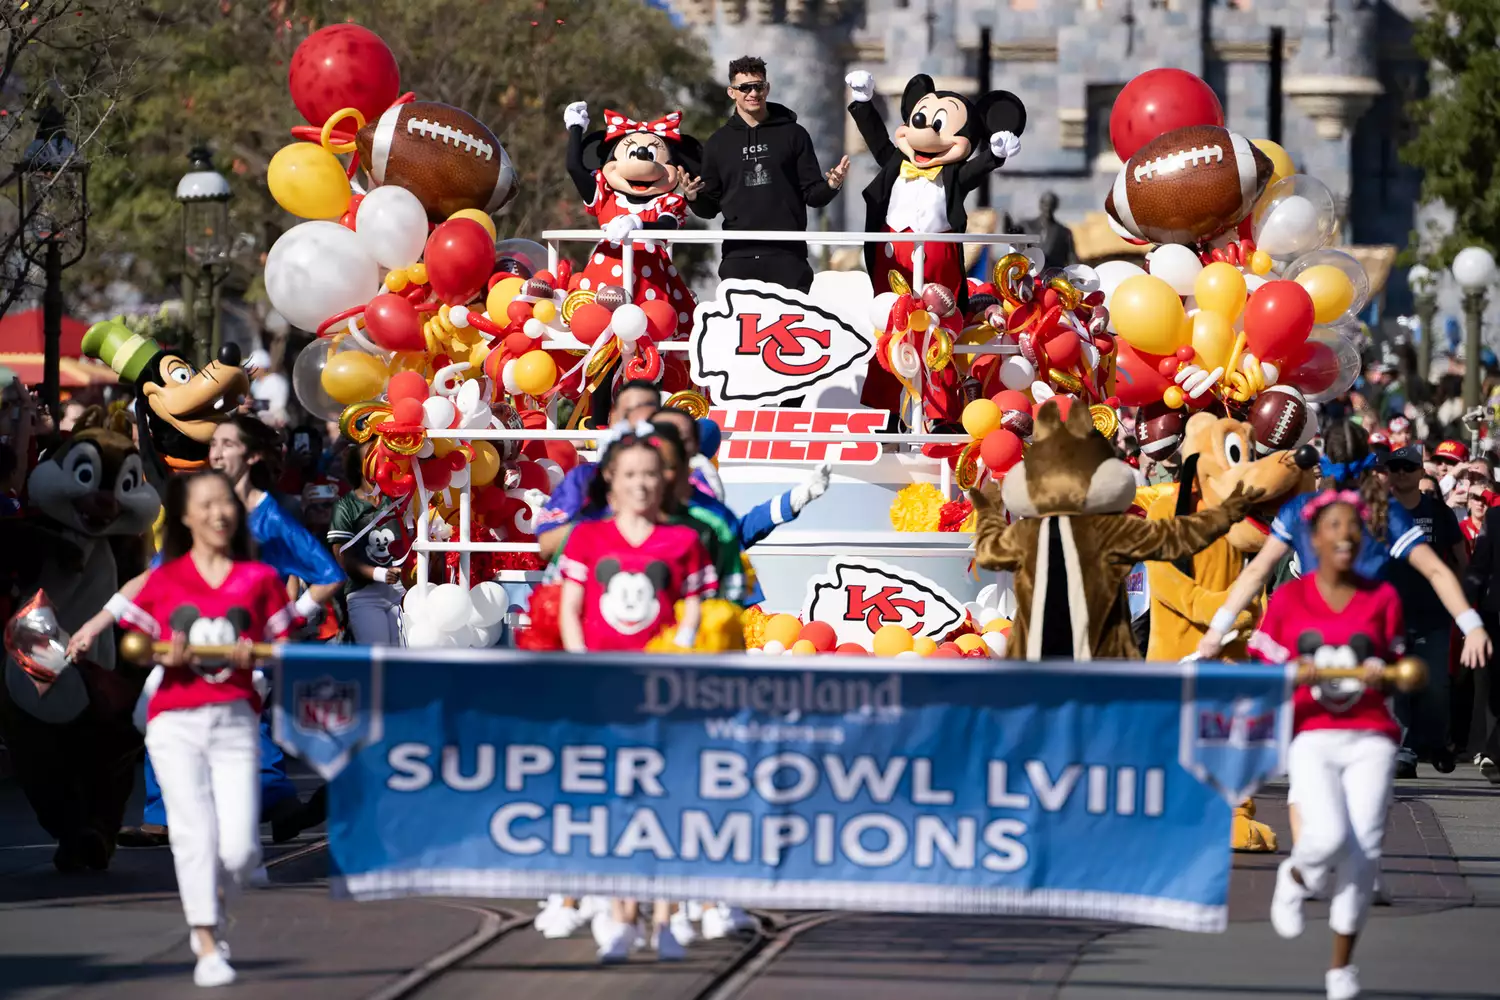 MVP Patrick Mahomes of the Kansas City Chiefs celebrates Super Bowl LVIII victory with a jubilant cavalcade complete with Mickey Mouse and his pals down Main Street U.S.A